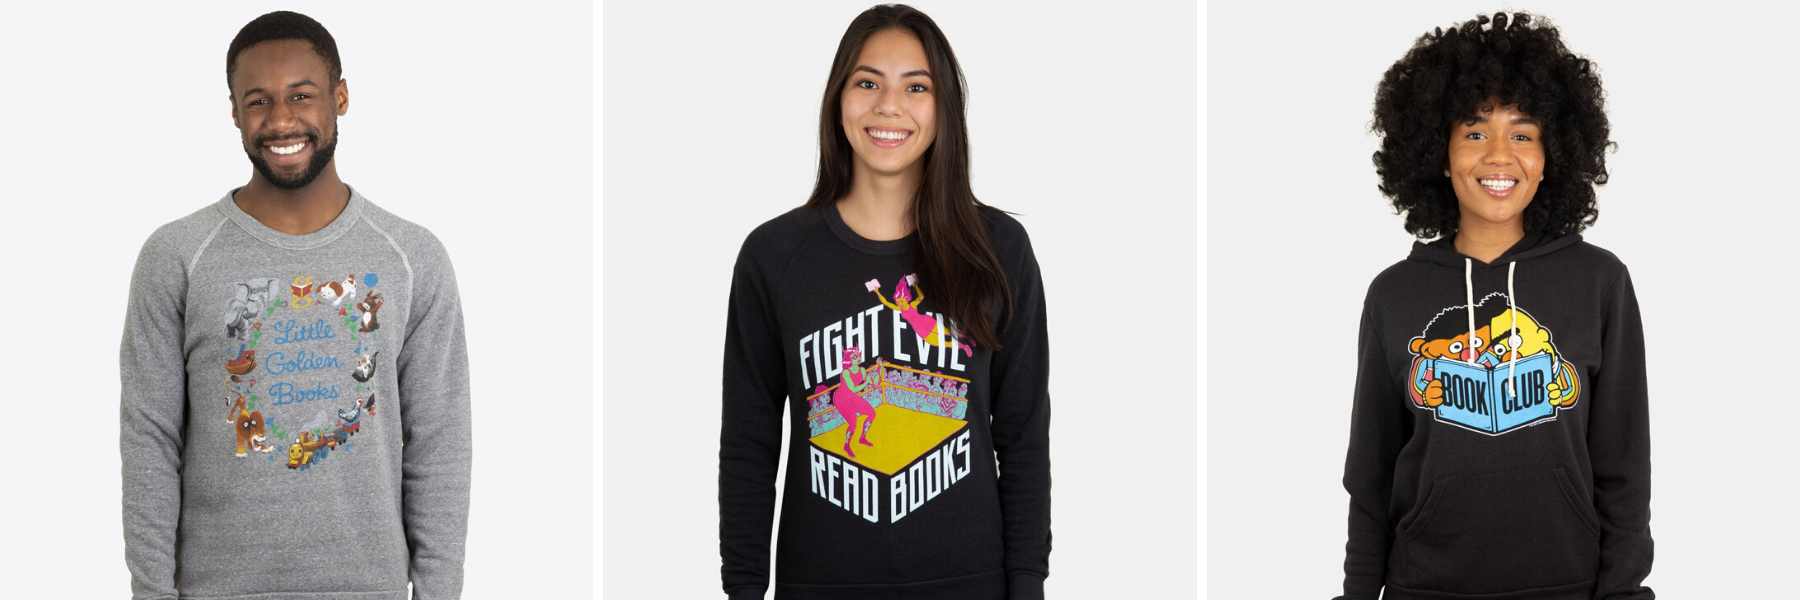 14 Of The Best Book Hoodies And Sweatshirts For A Cozier Winter